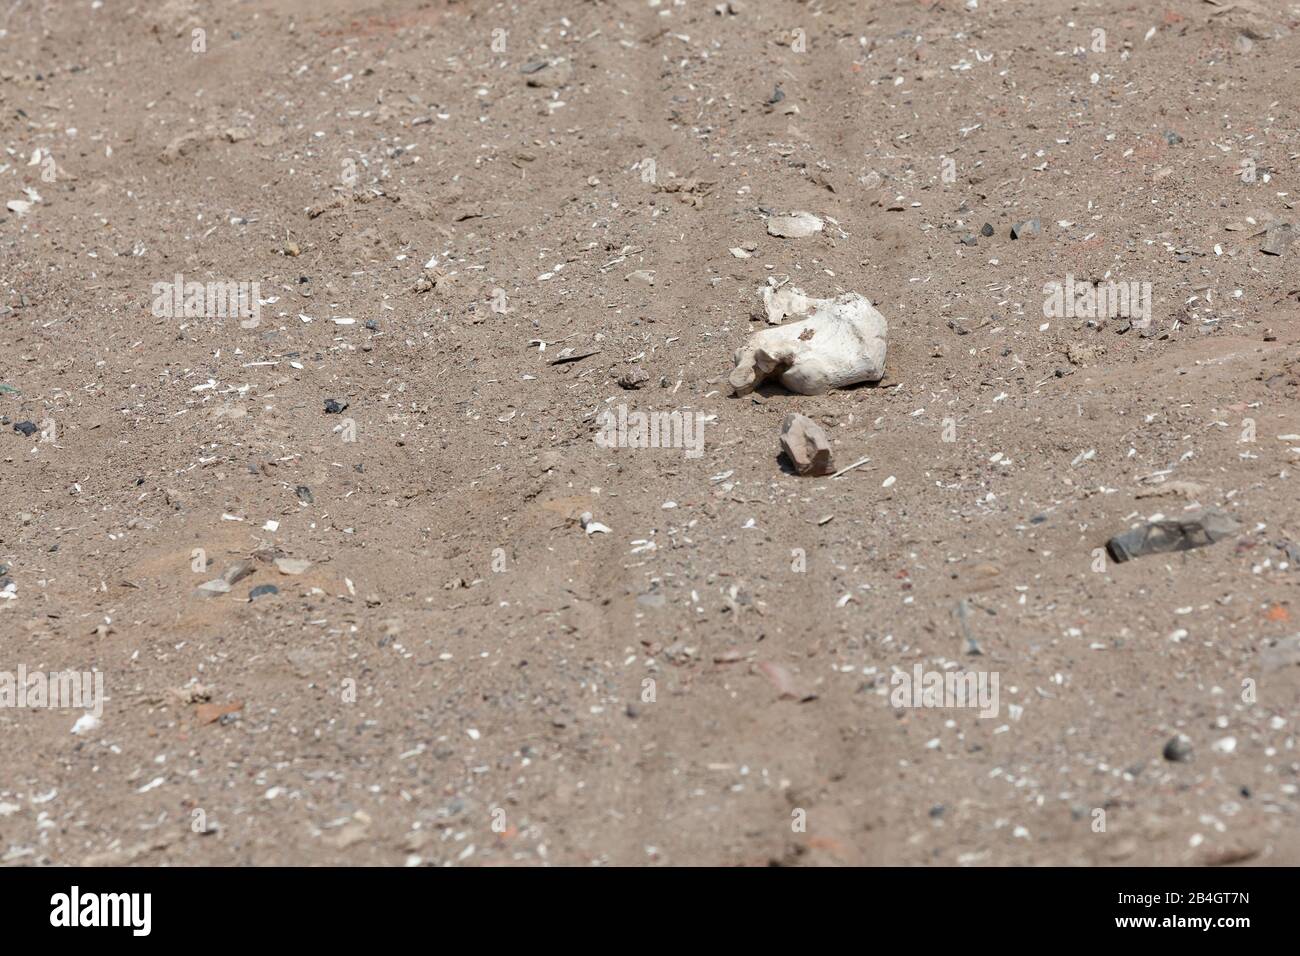 Bone fragments and remains from past civilizations laying on the desert sand in the archeological site of Pachacamac, Peru. Stock Photo